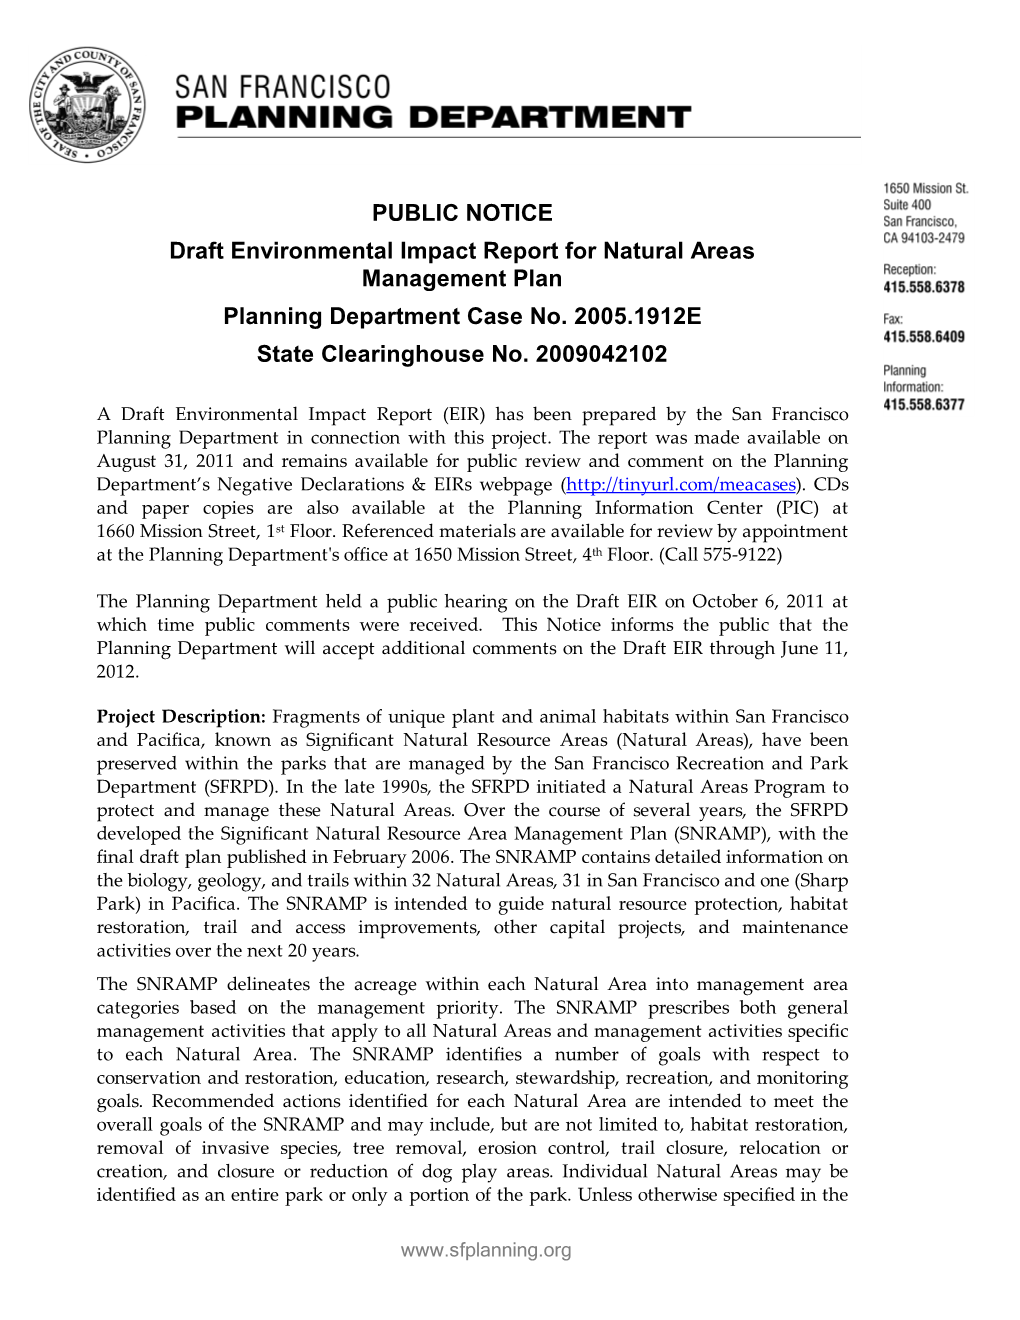 PUBLIC NOTICE Draft Environmental Impact Report for Natural Areas Management Plan Planning Department Case No. 2005.1912E State Clearinghouse No